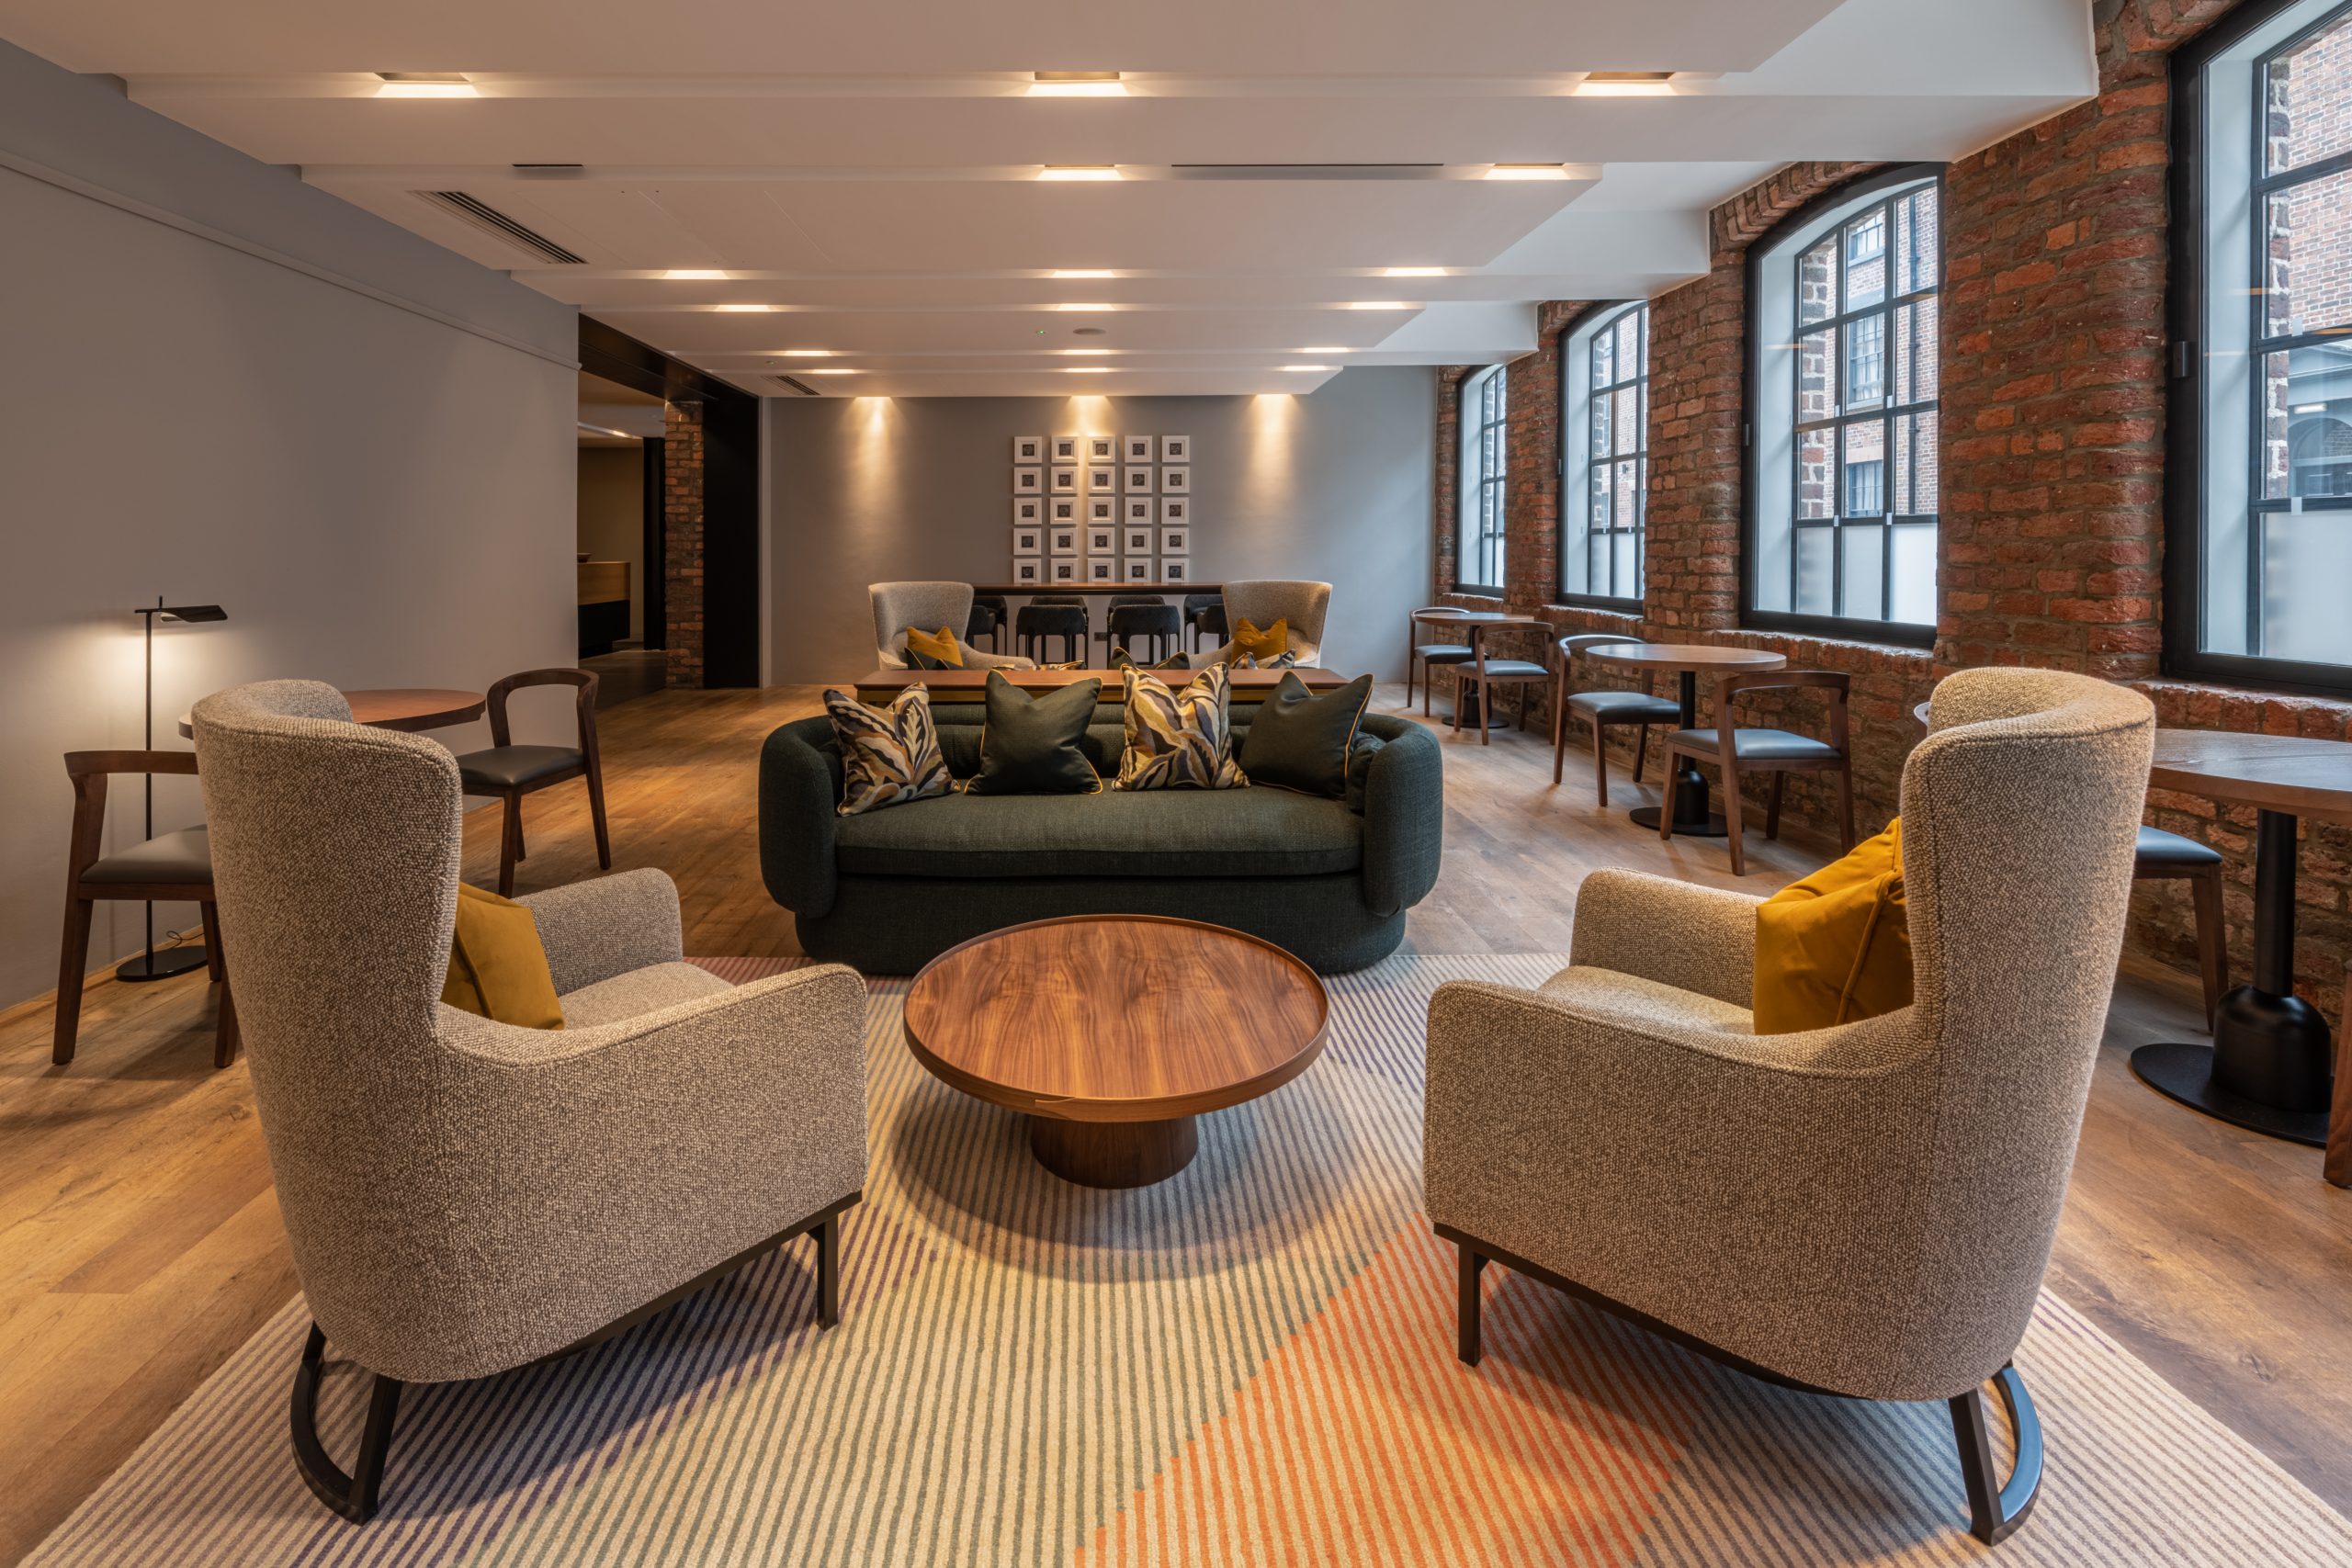 The Resident Liverpool lounge with multiple seating areas and coffee tables.